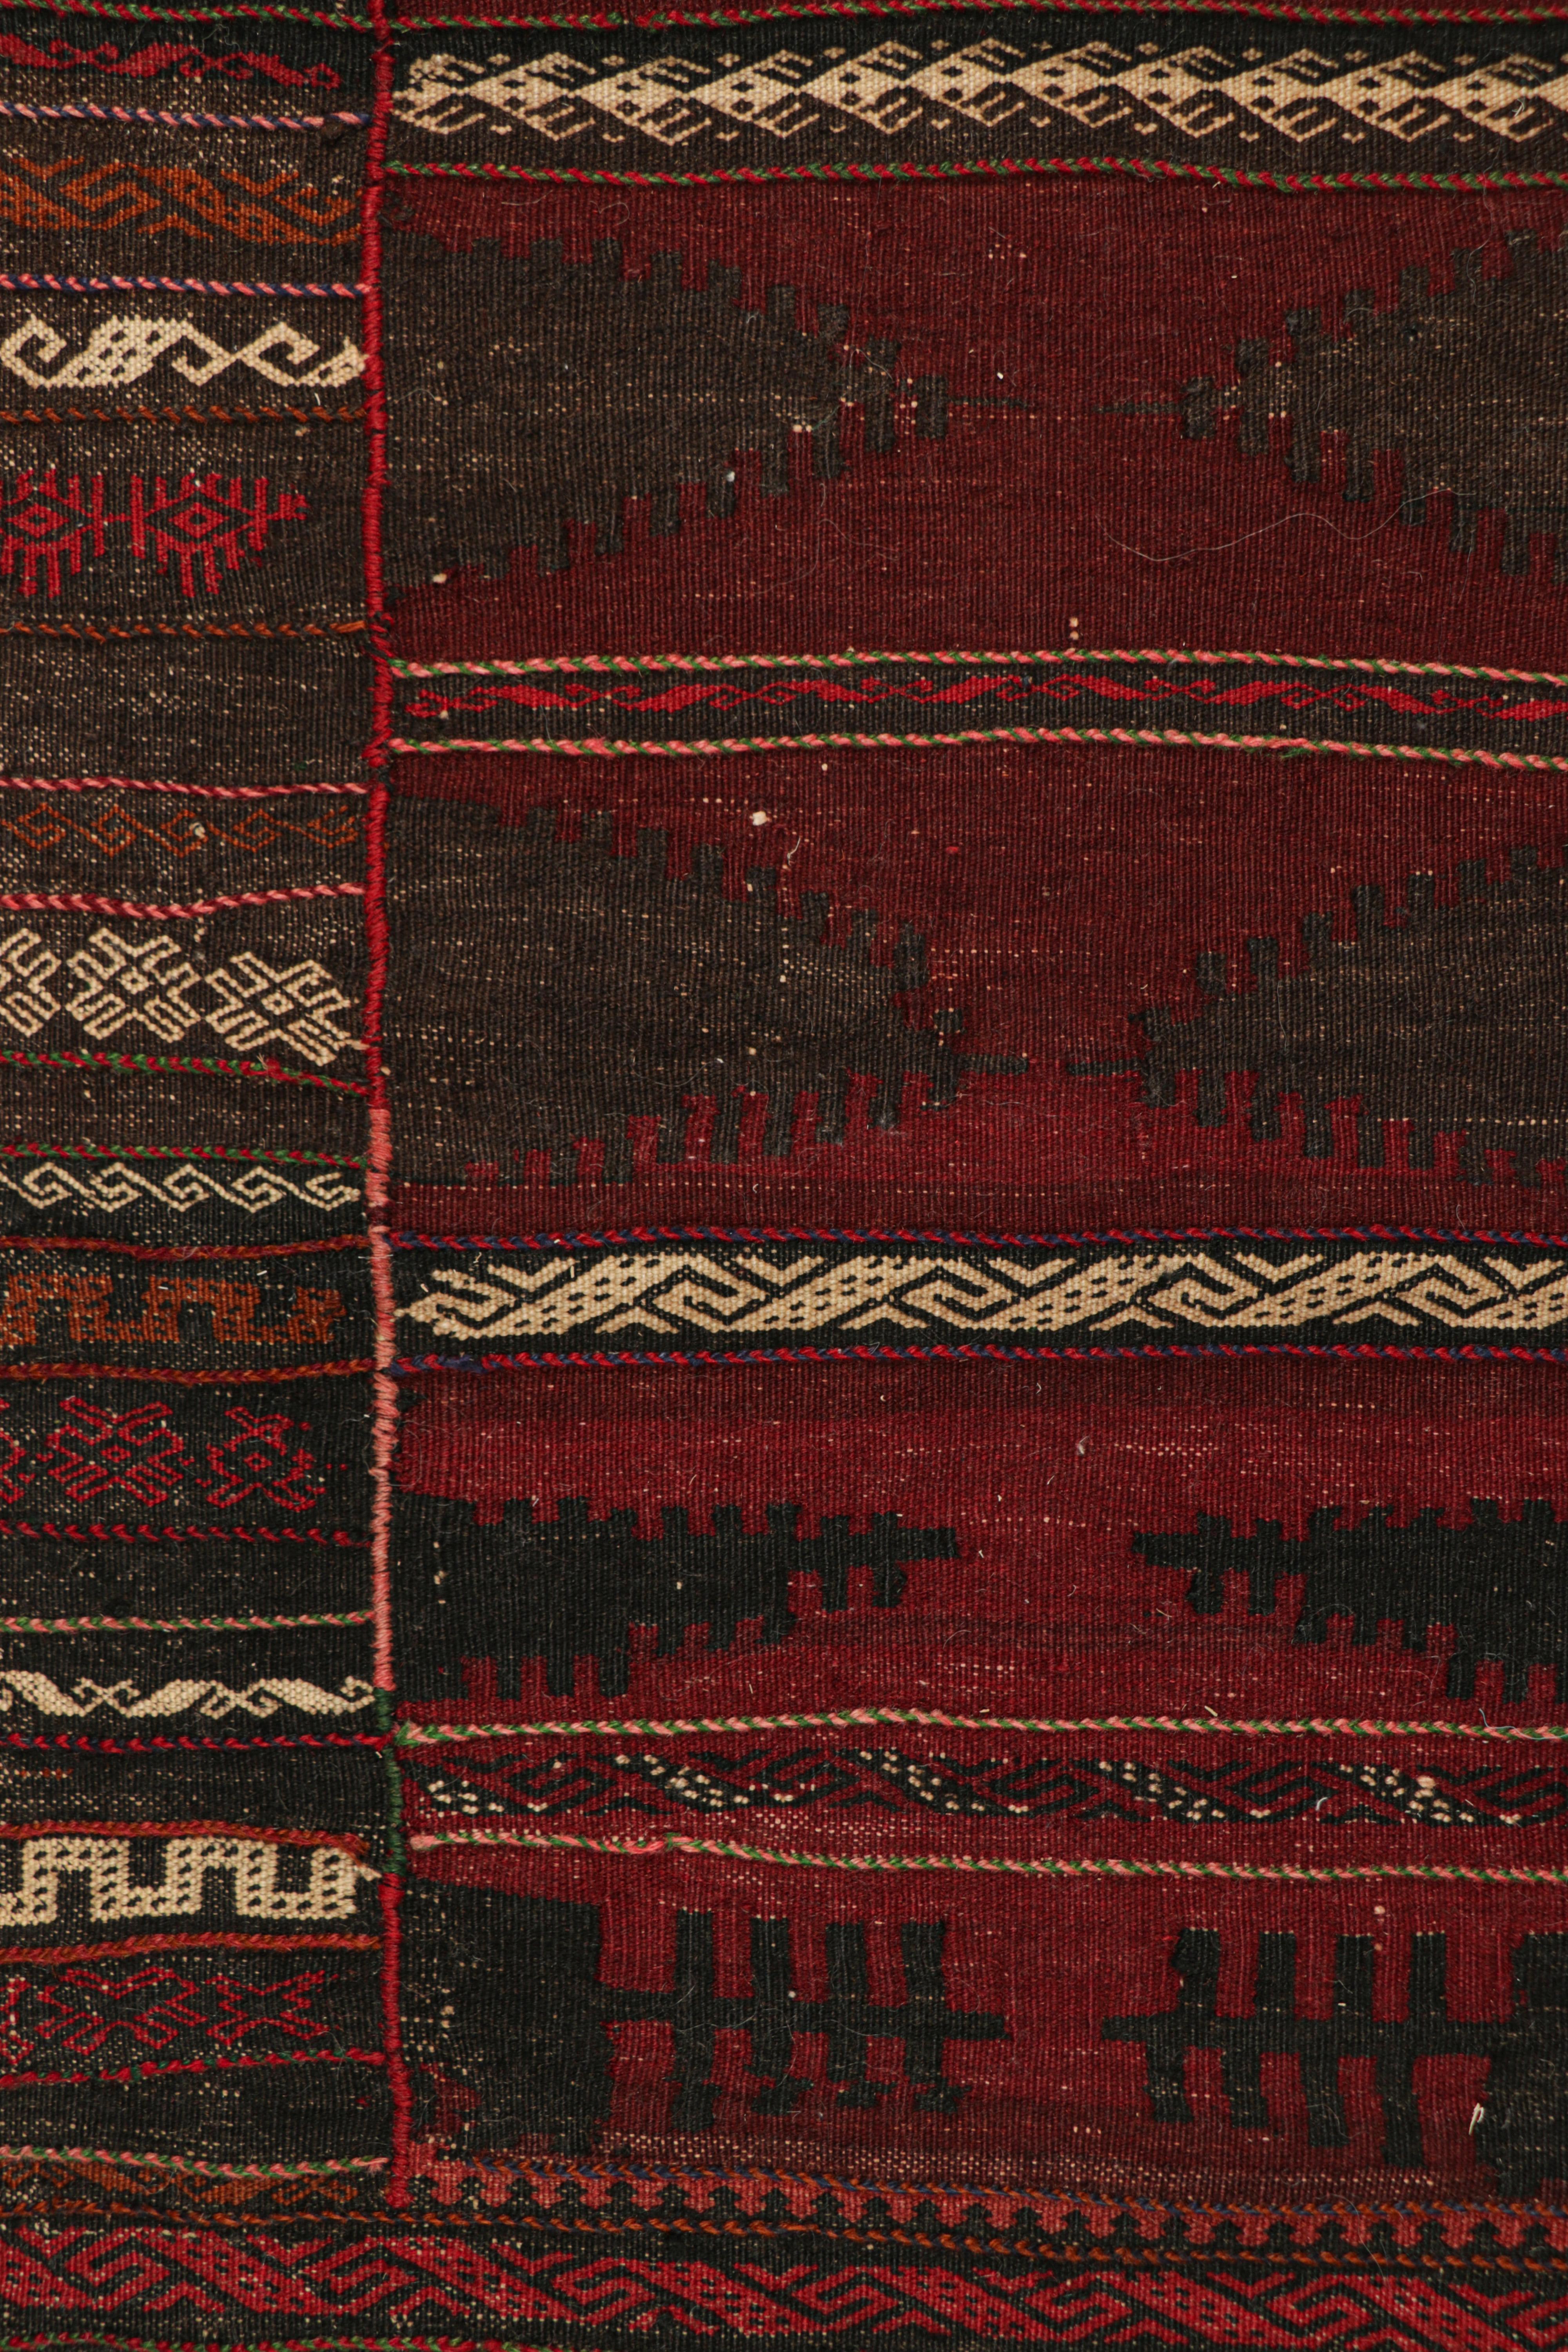 Handwoven in wool, circa 1950-1960, this 2×5 vintage Afghan tribal kilim, is a collectible tribal piece that may have been used as table covers in nomadic daily life, much similar to Persian Sofreh Kilims.

On the Design: 

Drawing on Afghan tribal